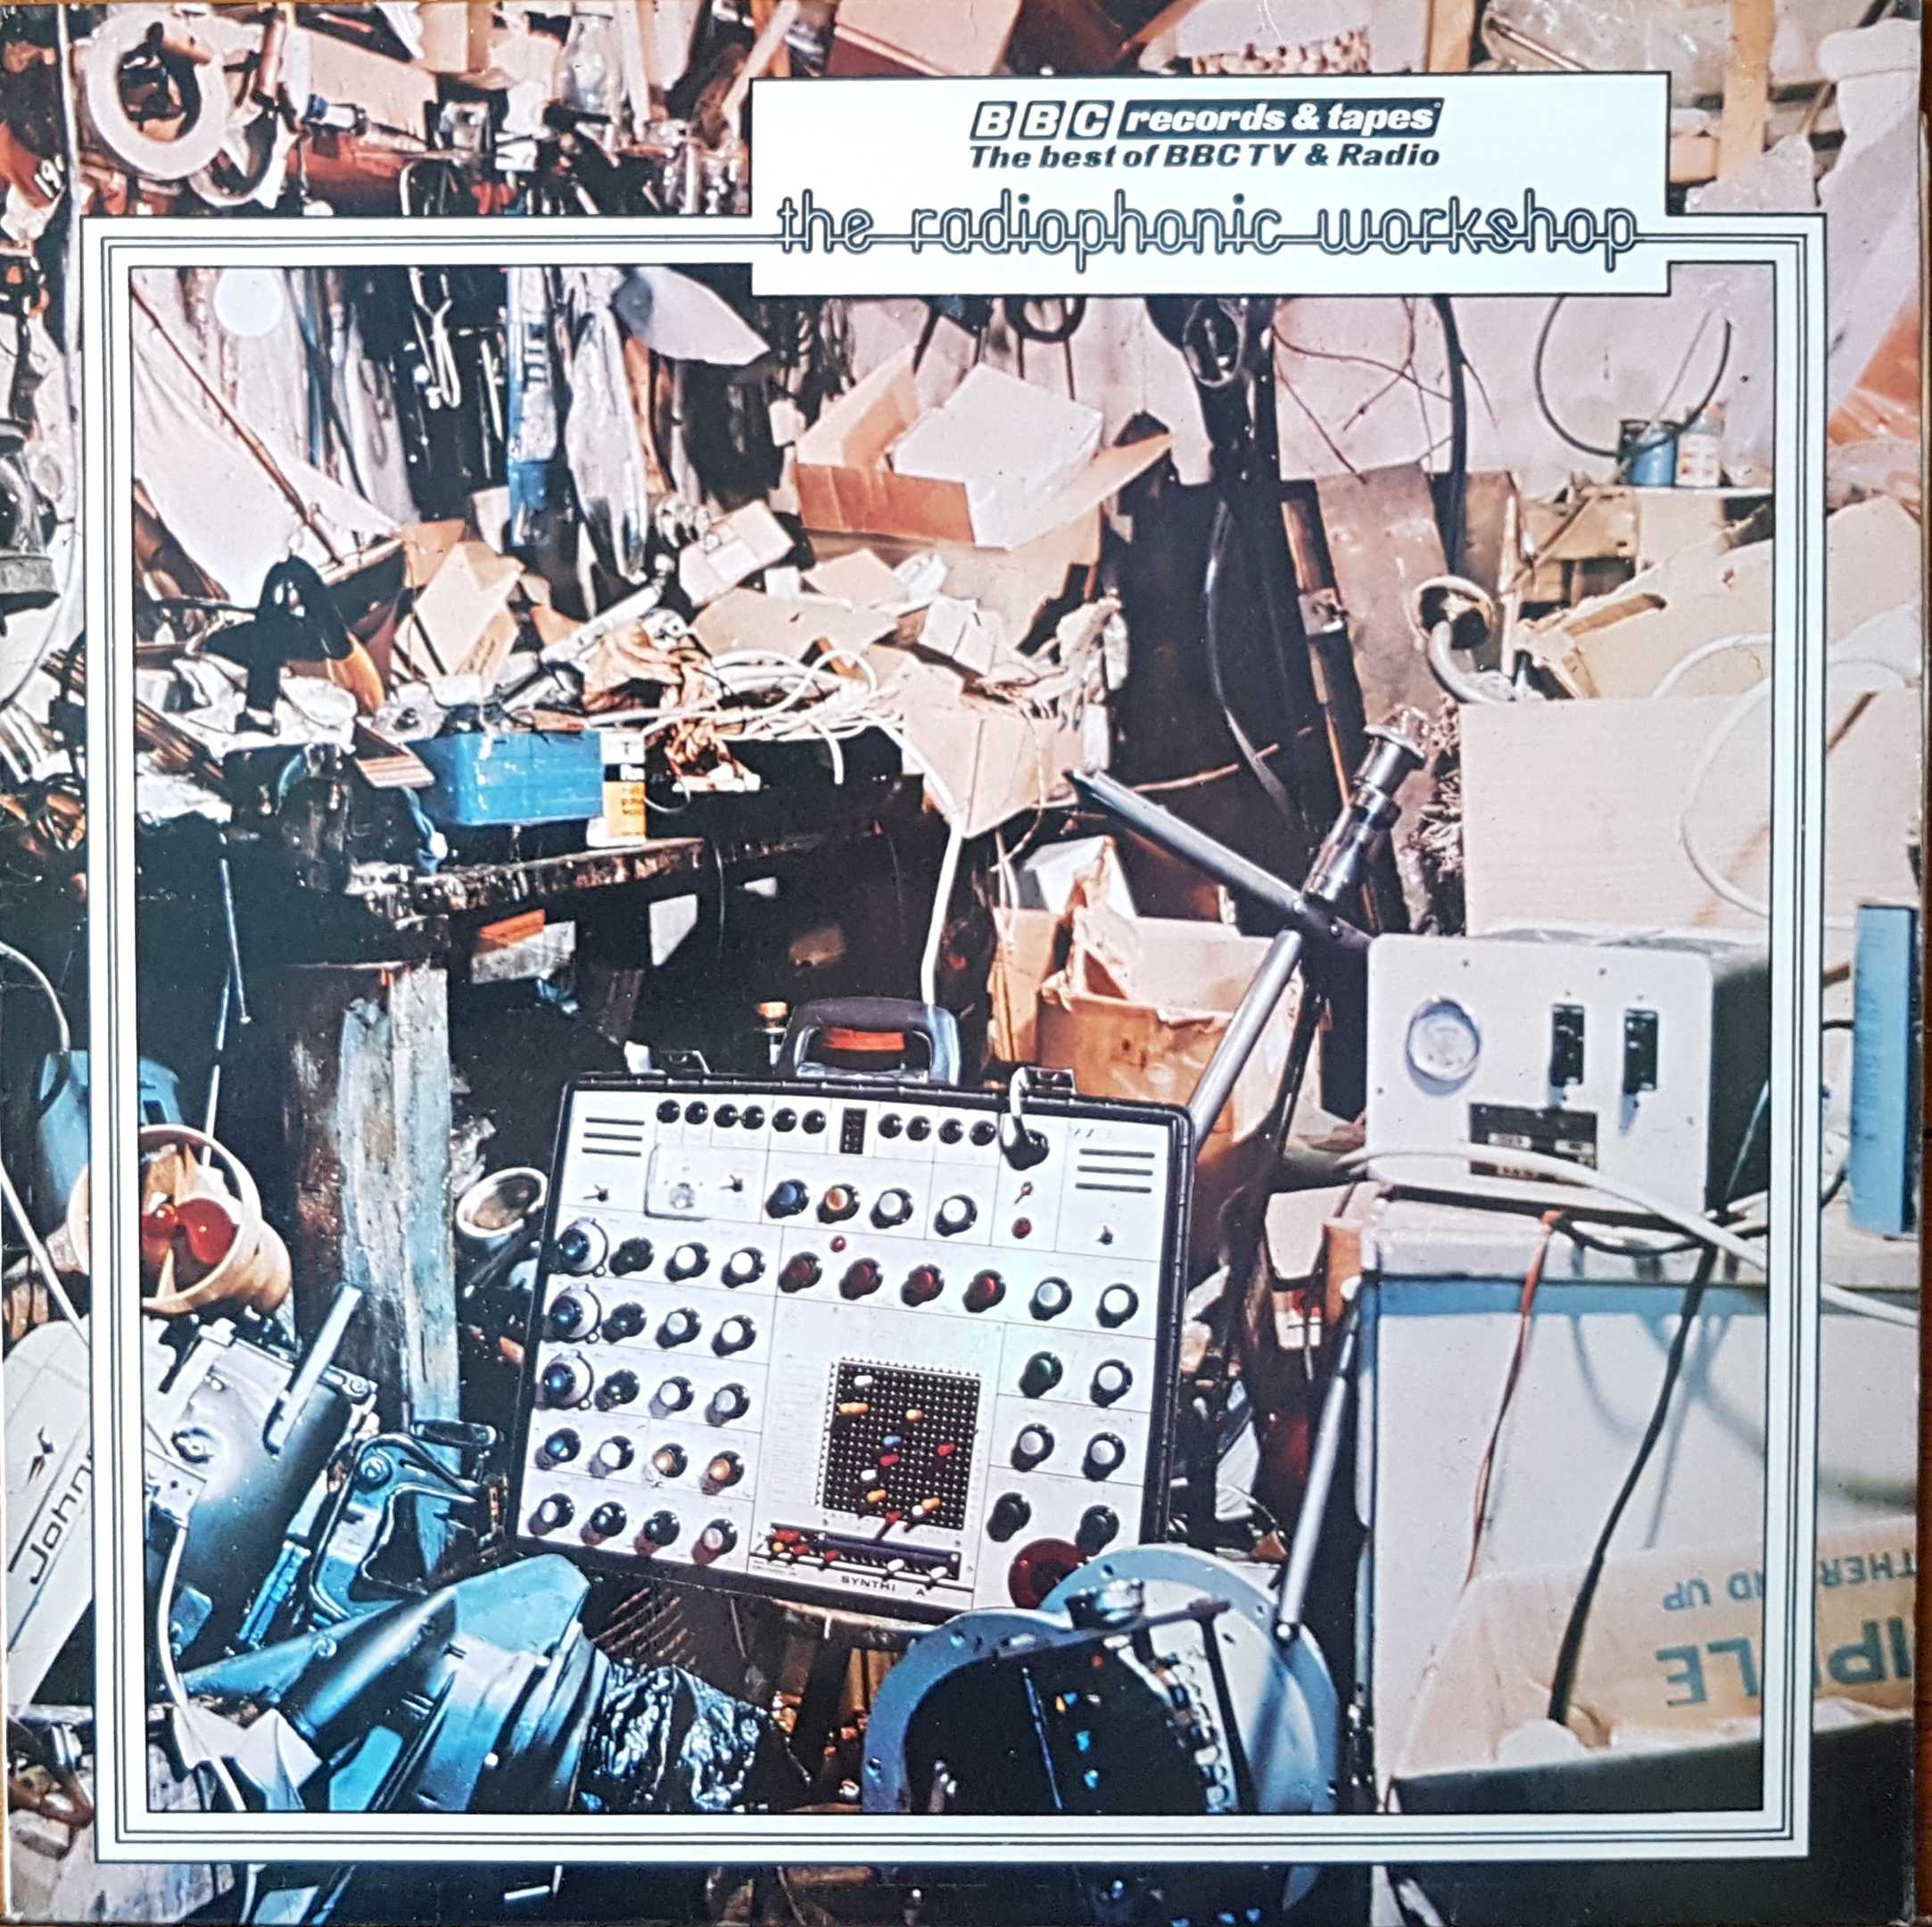 Picture of REC 196 The radiophonic workshop by artist Various from the BBC albums - Records and Tapes library